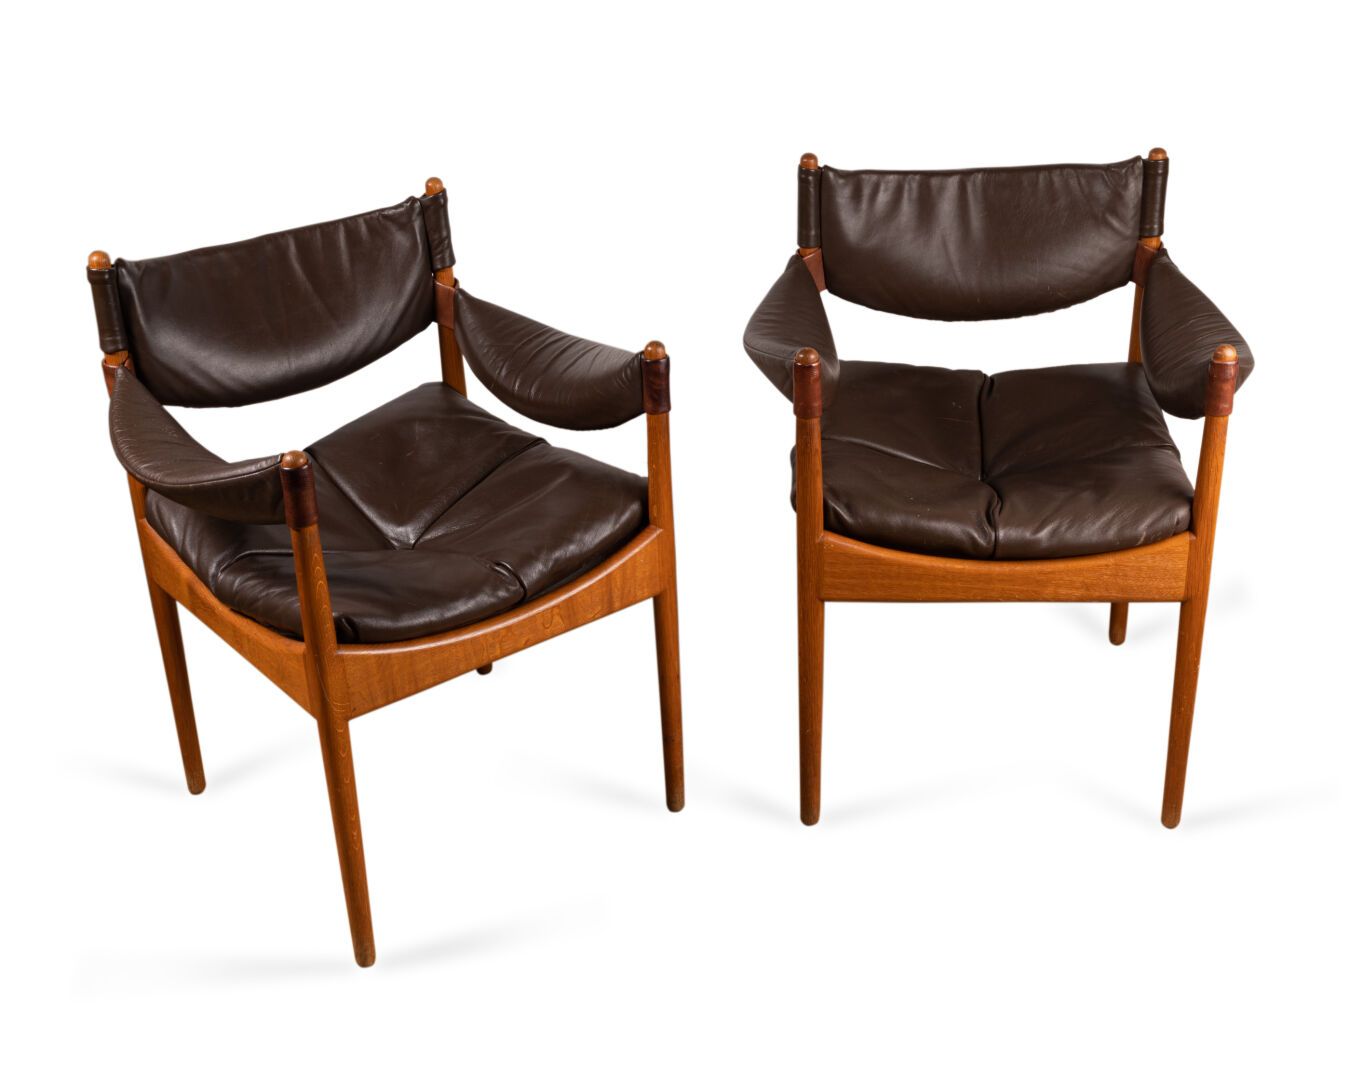 Kristian SOLMER-VEDEL (1923-2003) Pair of CHAIRS, Modus model

Oak and brown lea&hellip;